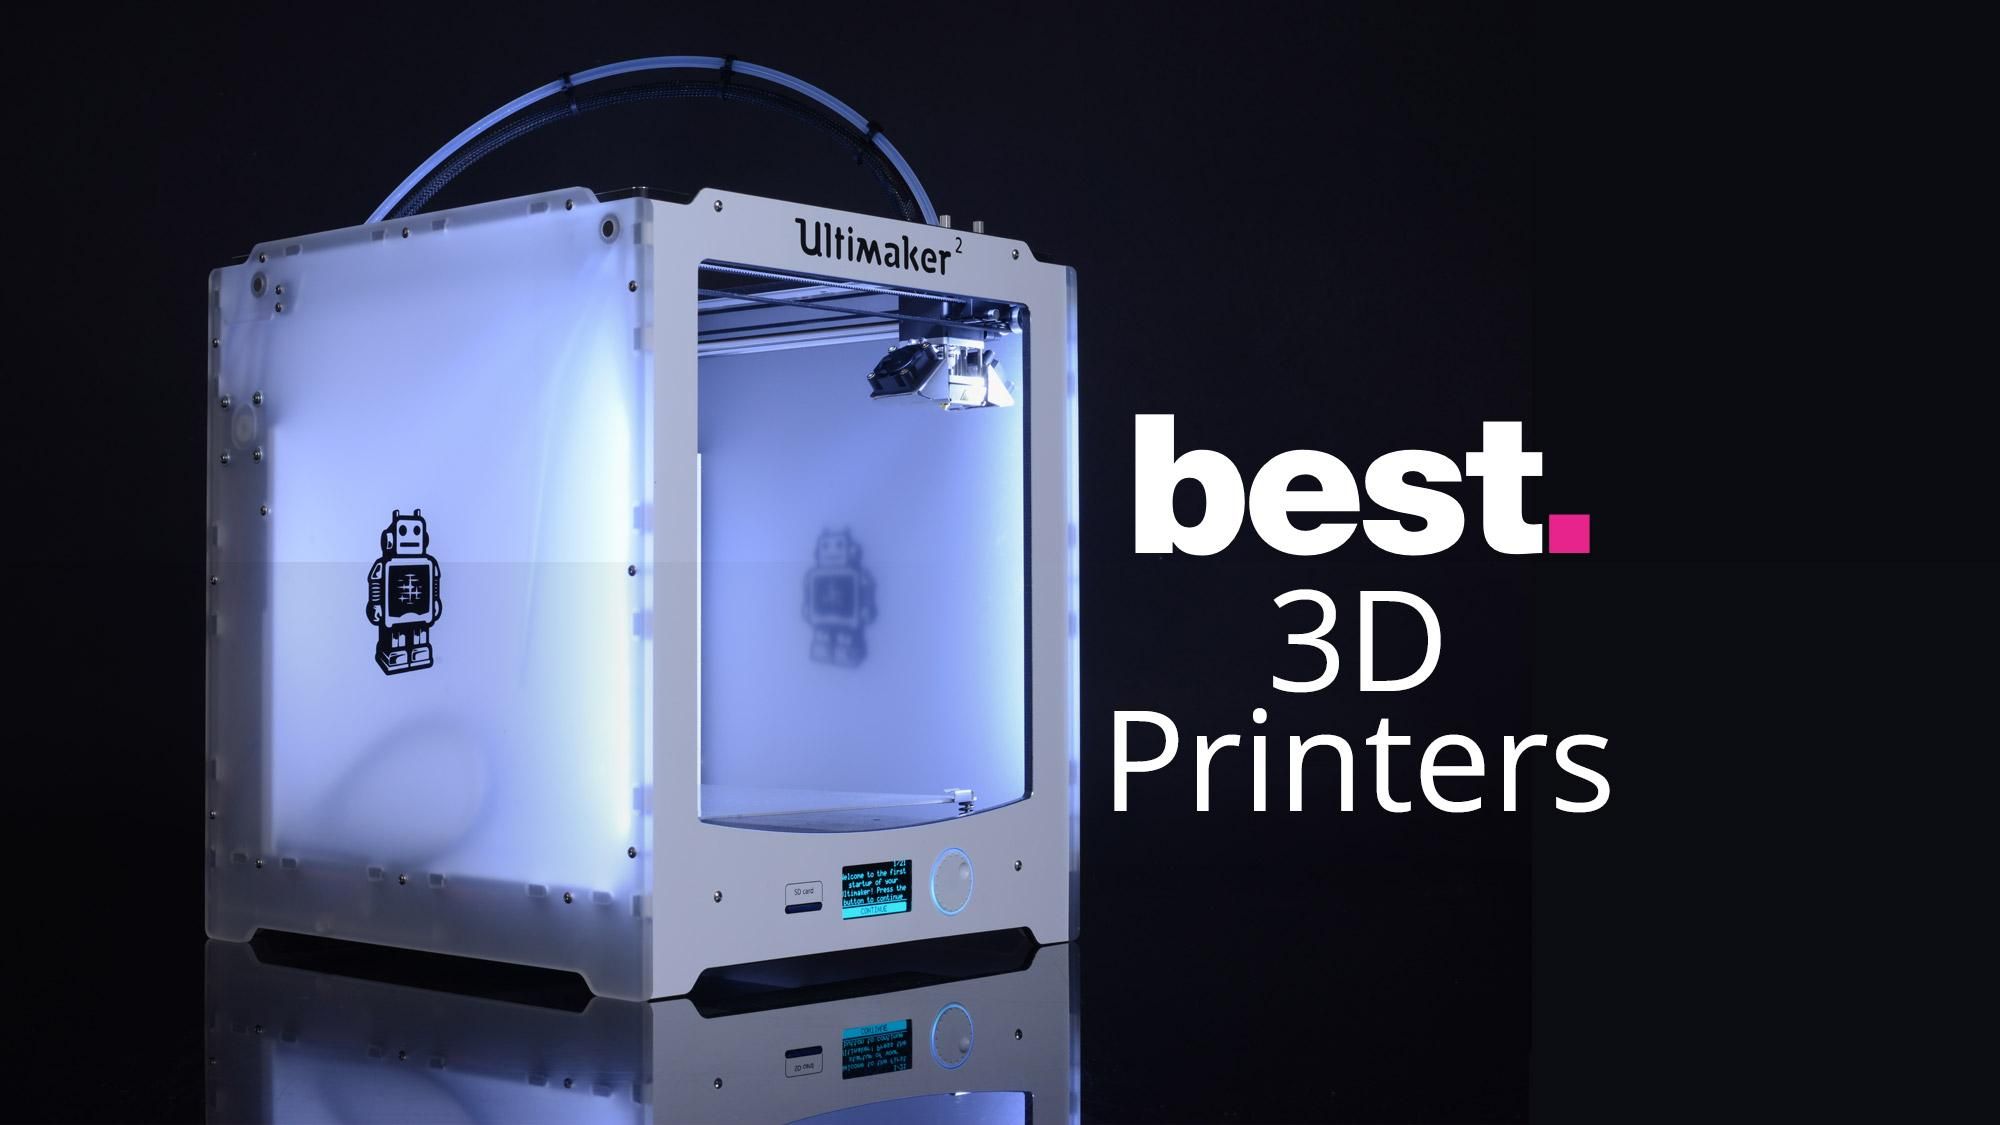 The best Manufacturing 3D printers from SEACAD